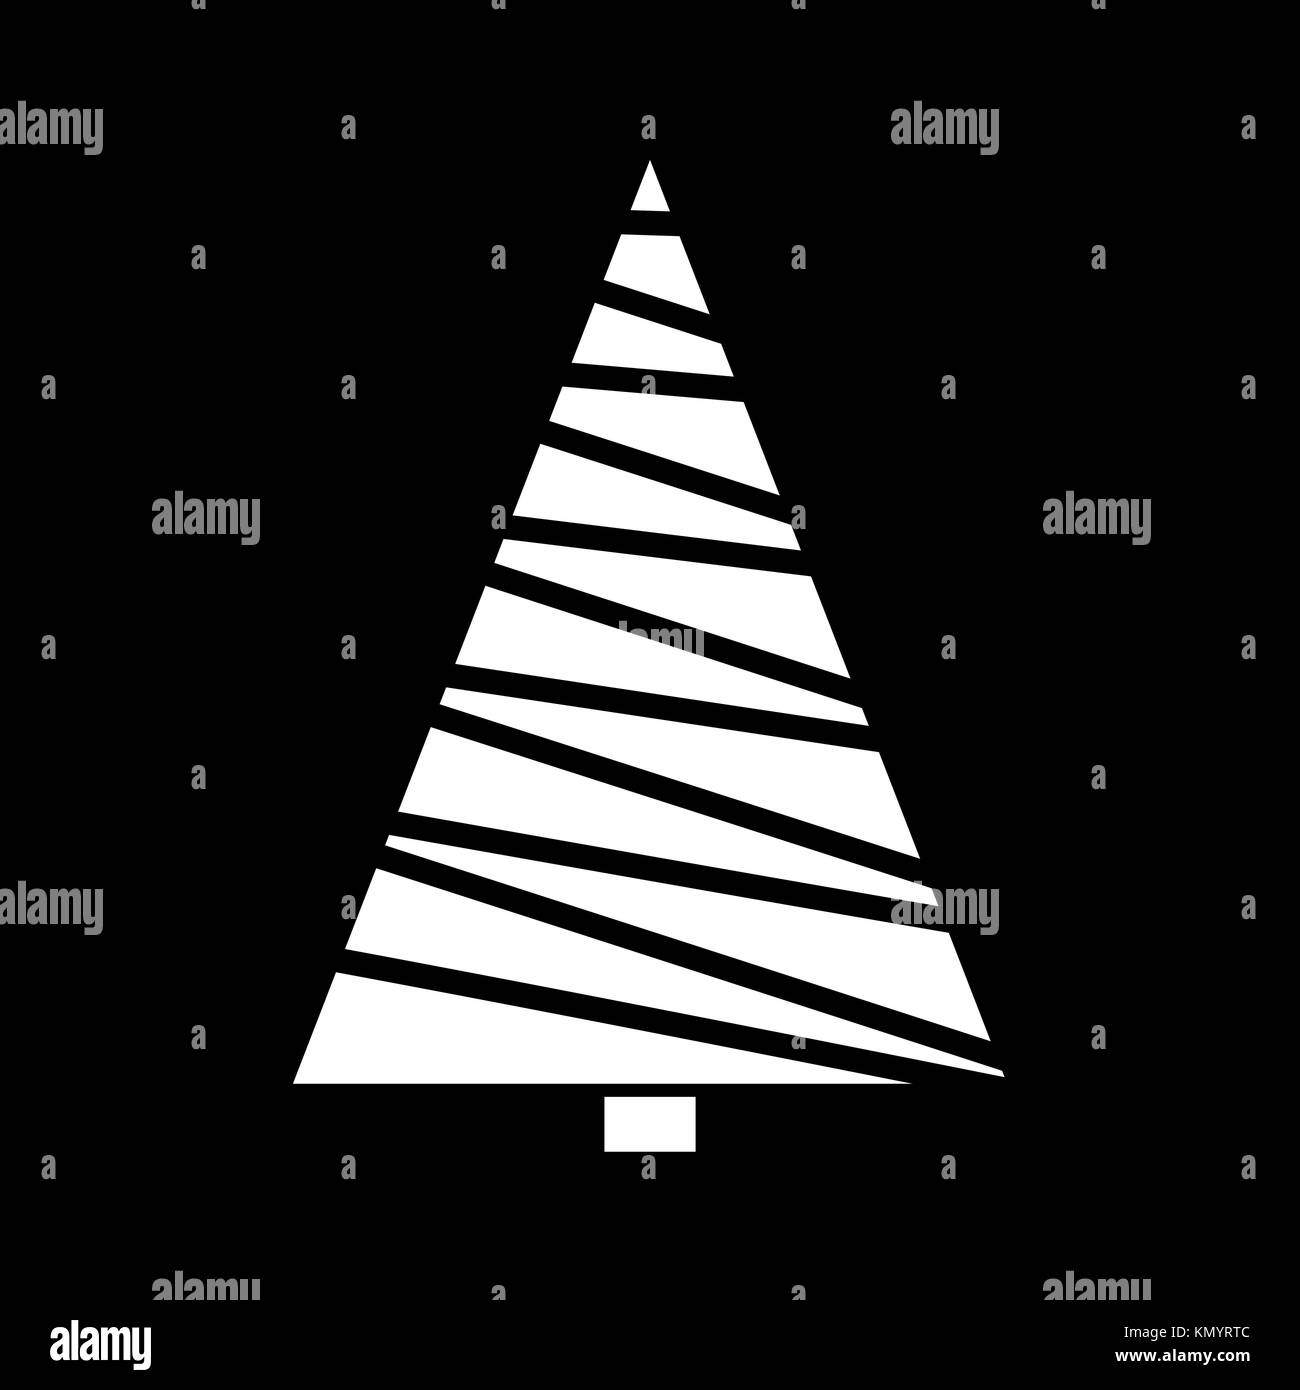 Christmas tree simple outline design isolated on black background Stock Vector